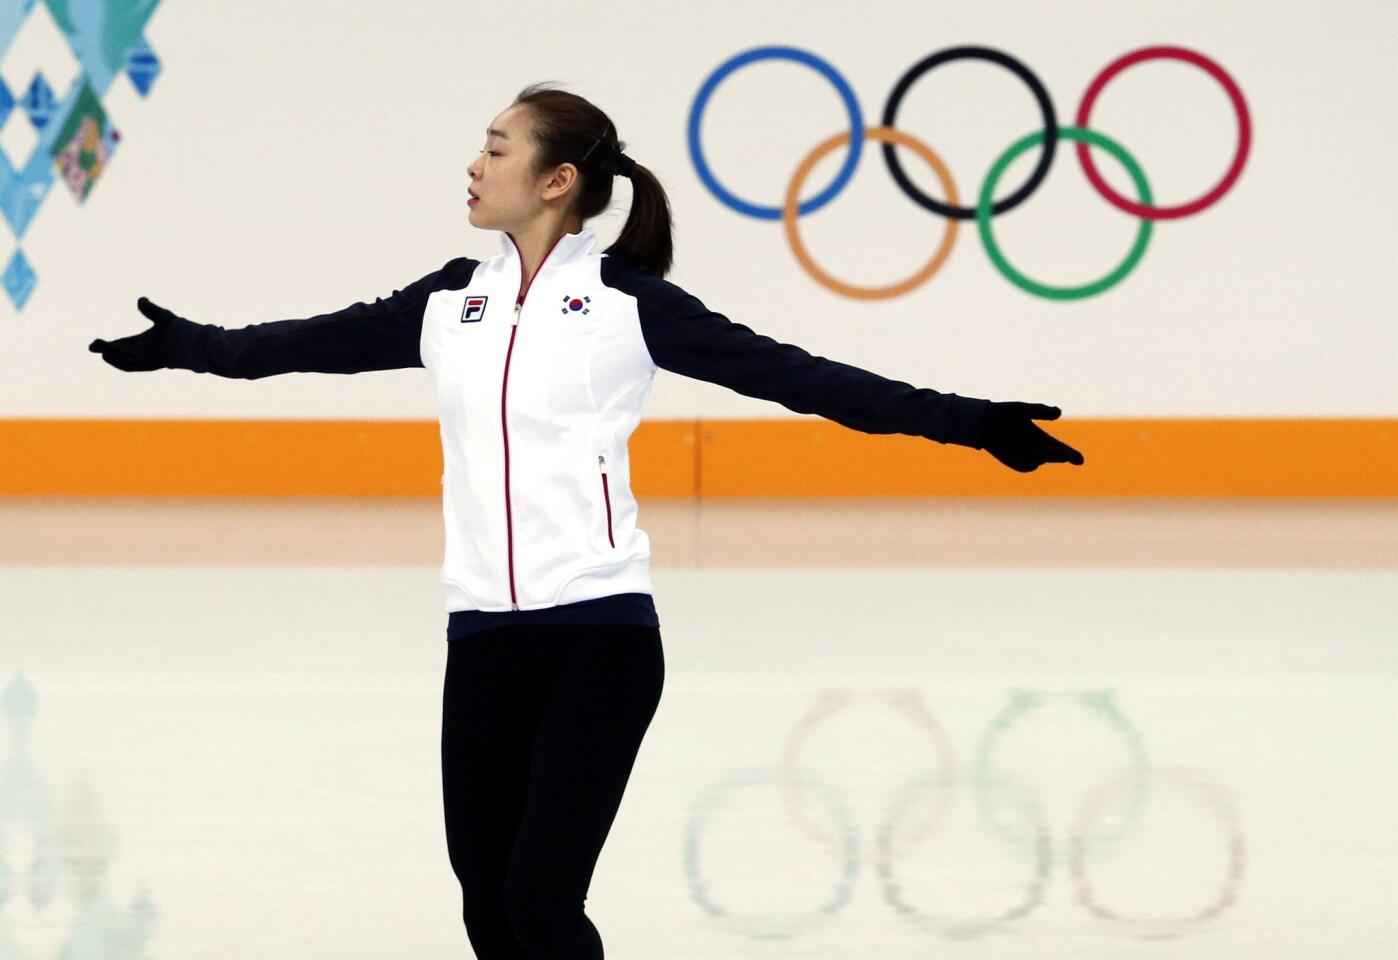 YUNA KIM, 23, SOUTH KOREA Major achievements: 2010 Olympic champion, 2013 and 2009 world champion. Music: Short, "Send in the Clowns" by Stephen Sondheim; Long, "Adios Nonino," tango by Astor Piazzola. The skinny: For the second straight year, Kim has entered a major championship having competed in only one minor international meet. Last season, she still won the world title easily. Her jumps look as secure as ever, but her programs are very inward-looking and not as likely to engage crowds as they did in Vancouver. Odds: 1-1